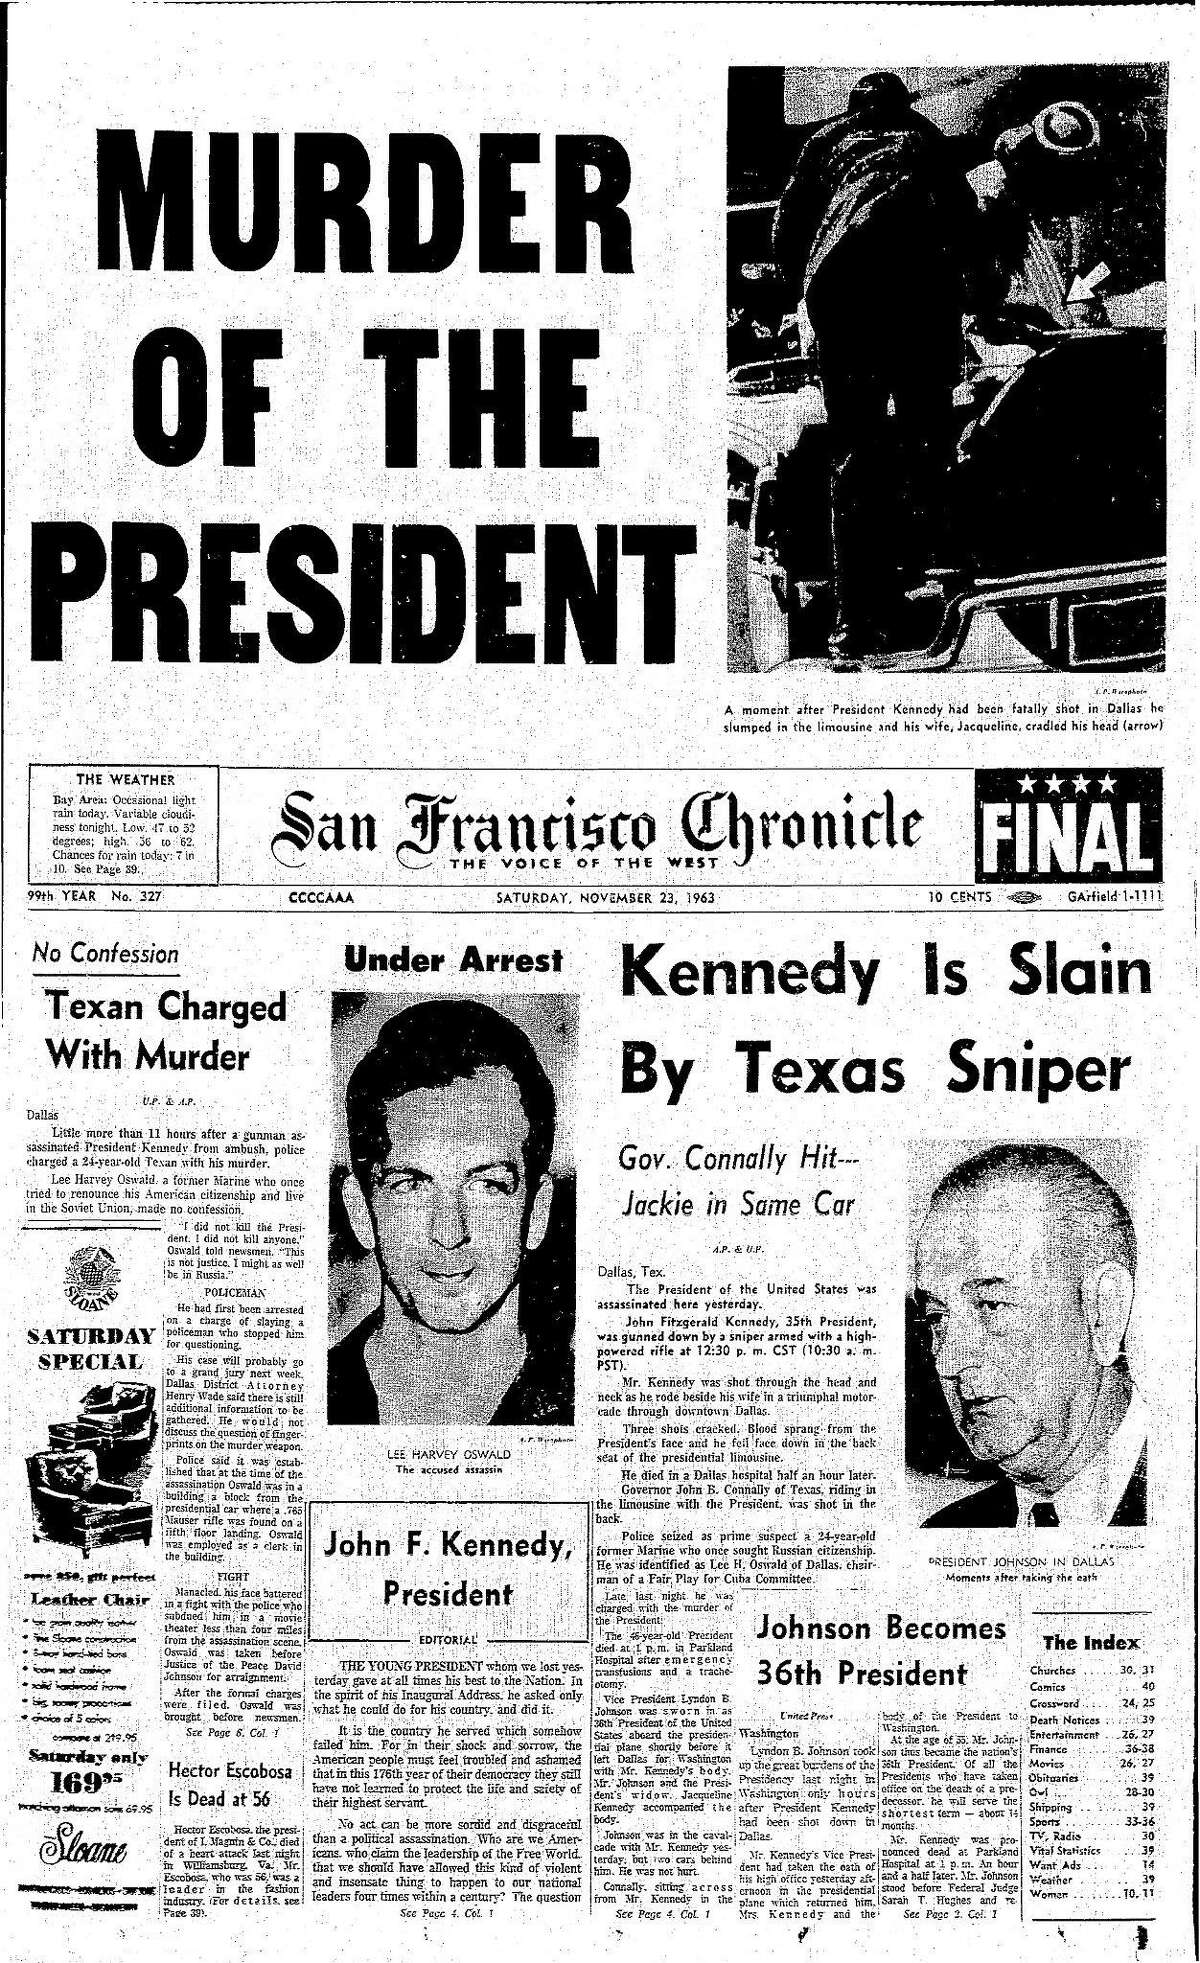 Chronicle Covers: The assassination of President John F. Kennedy